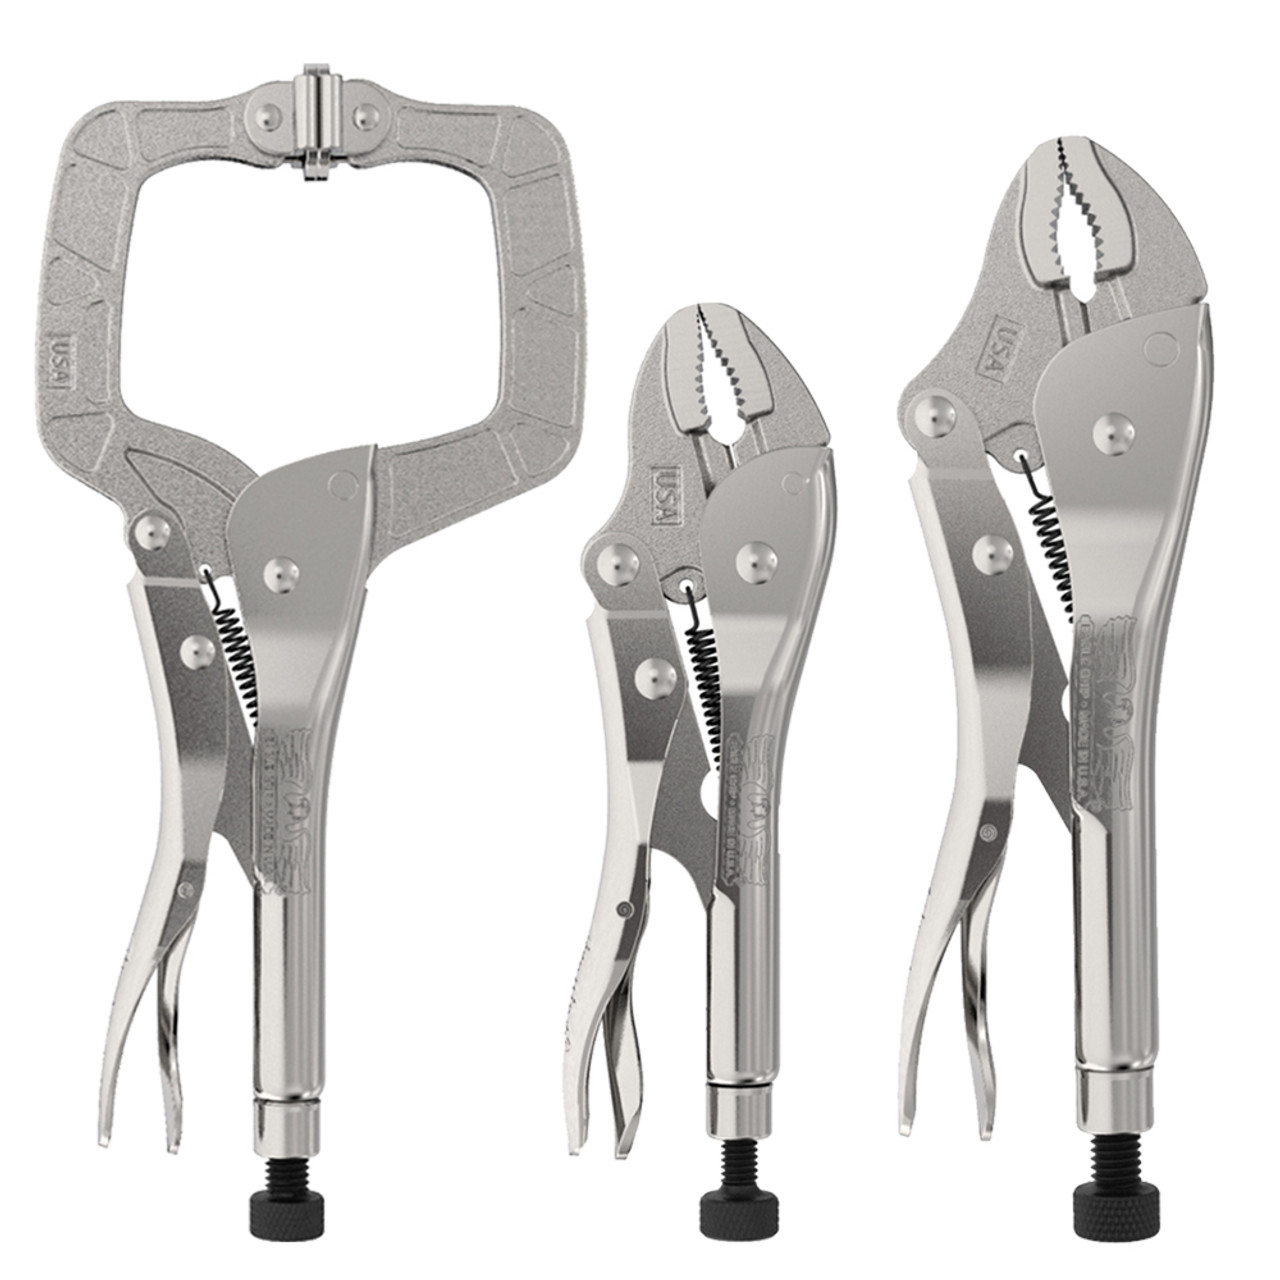 Malco Eagle Grip Locking Plier Combo Pack - 7in and 10in Curved Jaw plus  11in C-Clamp